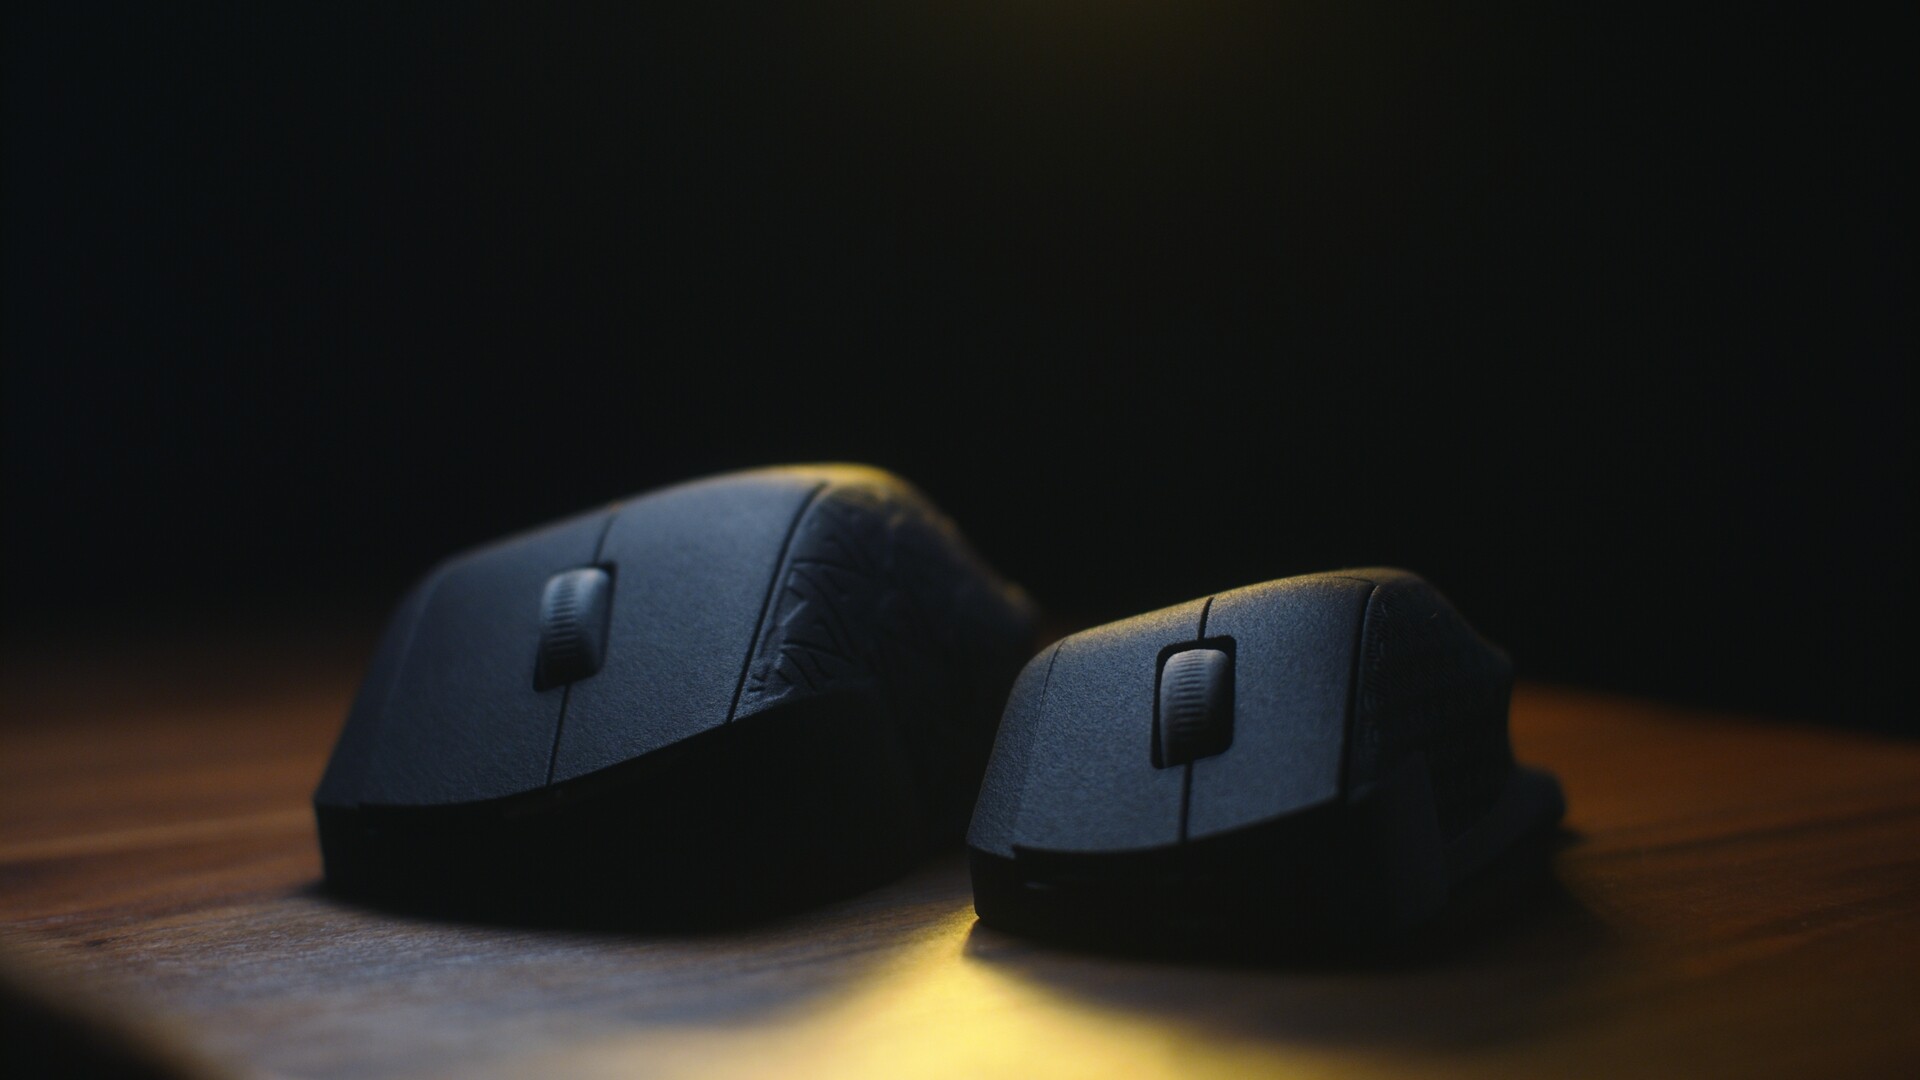 How To Make Your Own Gaming Mouse